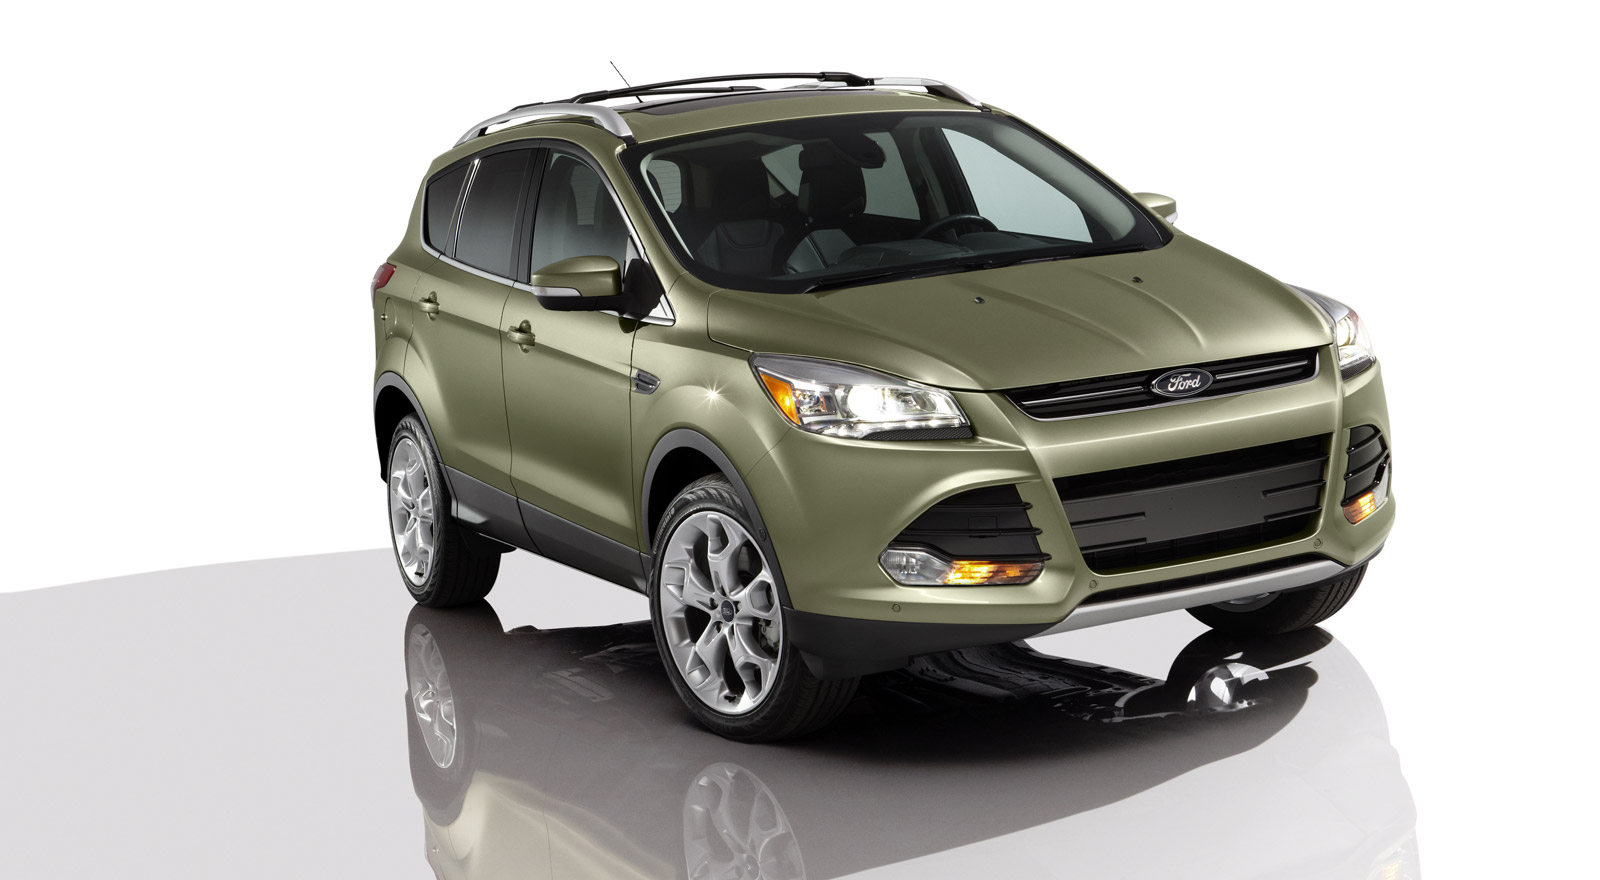 2013 Ford Escape, 2013-2014 Focus ST Recalled To Fix Electrical Glitch Linked To Stalling1600 x 880